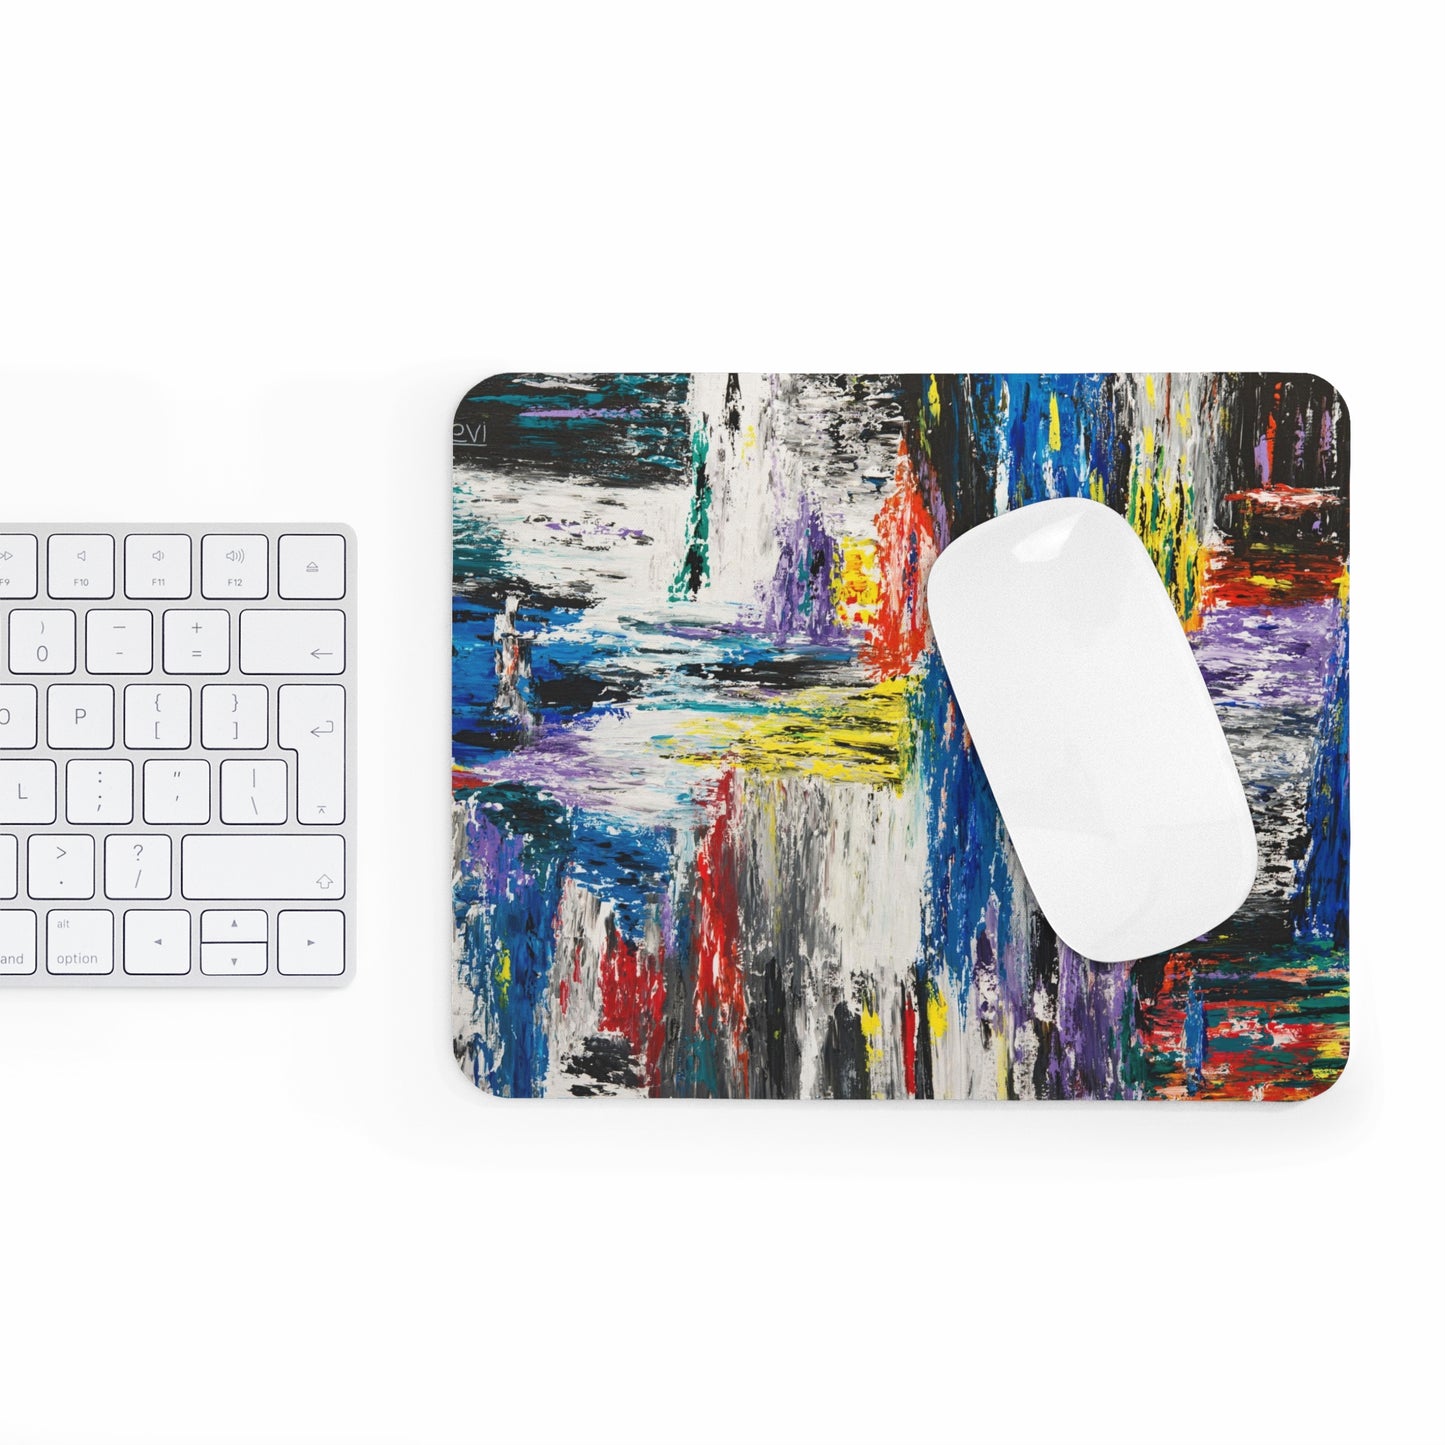 MOUSE PAD - BLUE WATERFALL